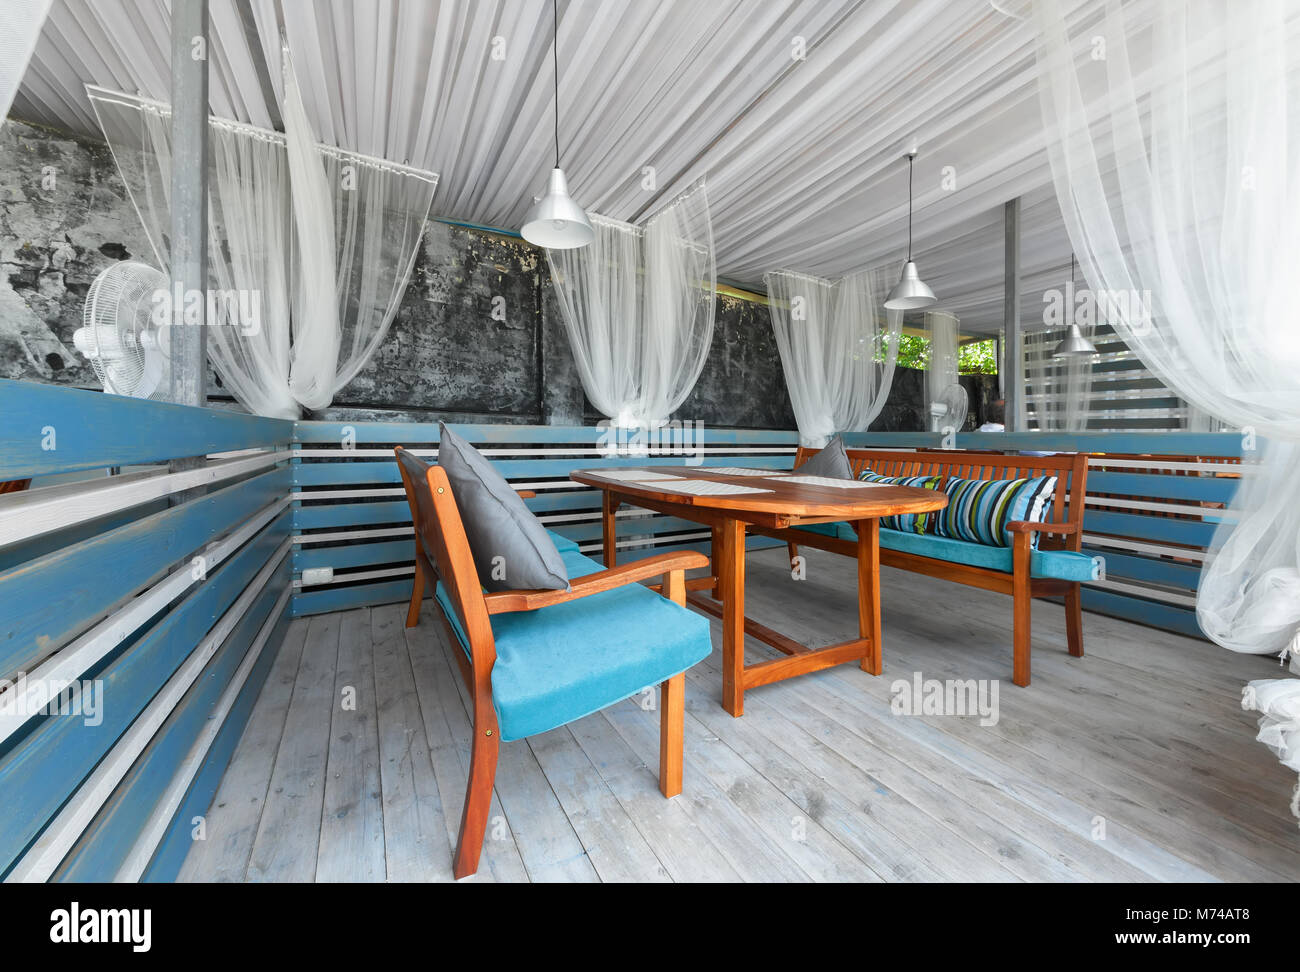 MOSCOW - JULY 2014: Interior of stylish Mediterranean cuisine Italian restaurant - 'SILLYCAT'. Covered veranda in a nautical style. Cabin with a table Stock Photo